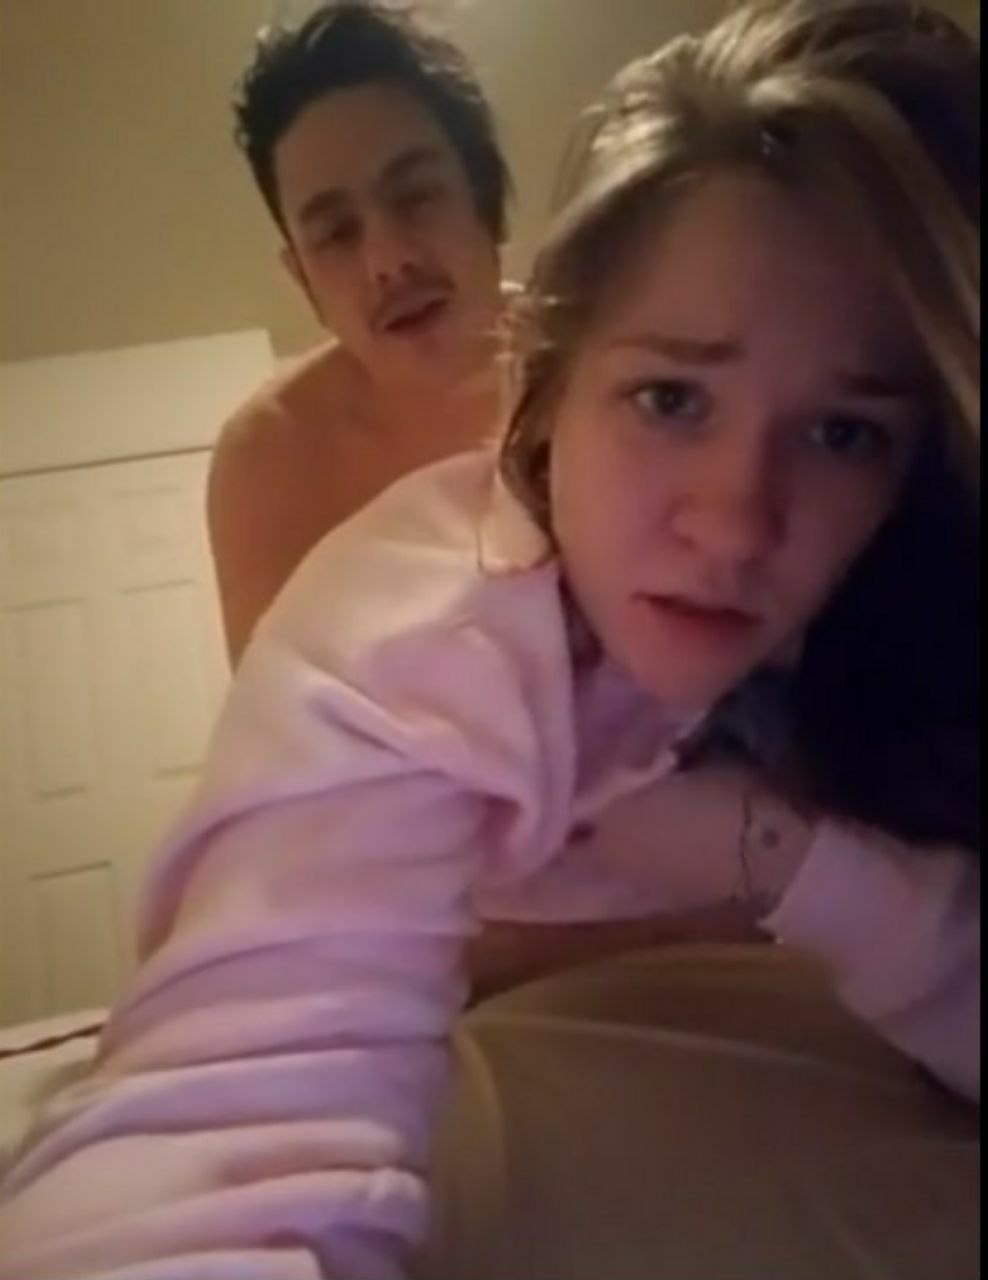 Brother And Sister Nude Selfies